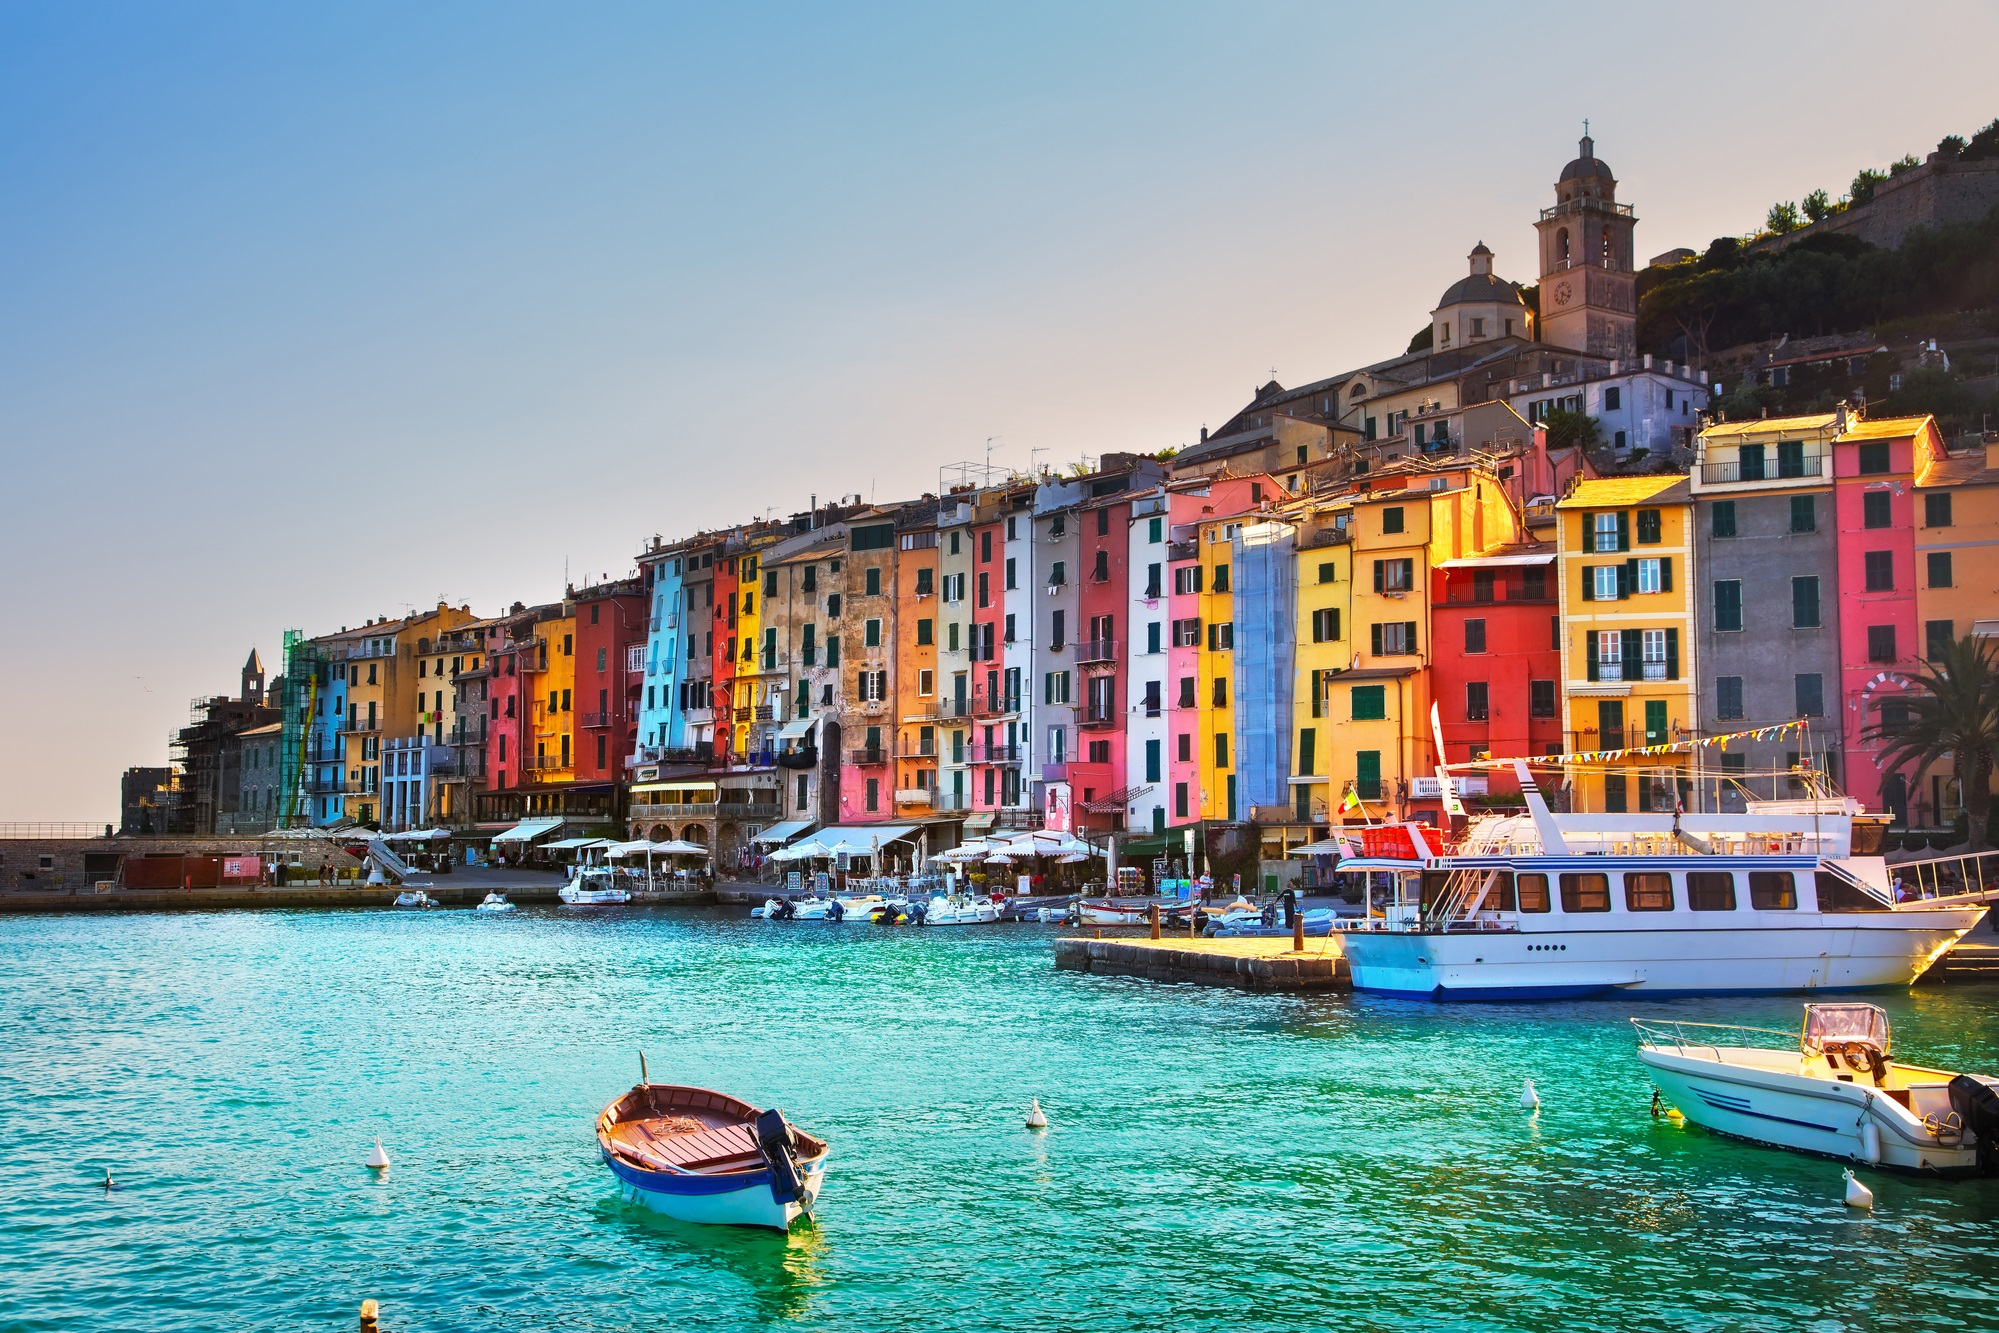 The unofficial list of the world’s most colorful places